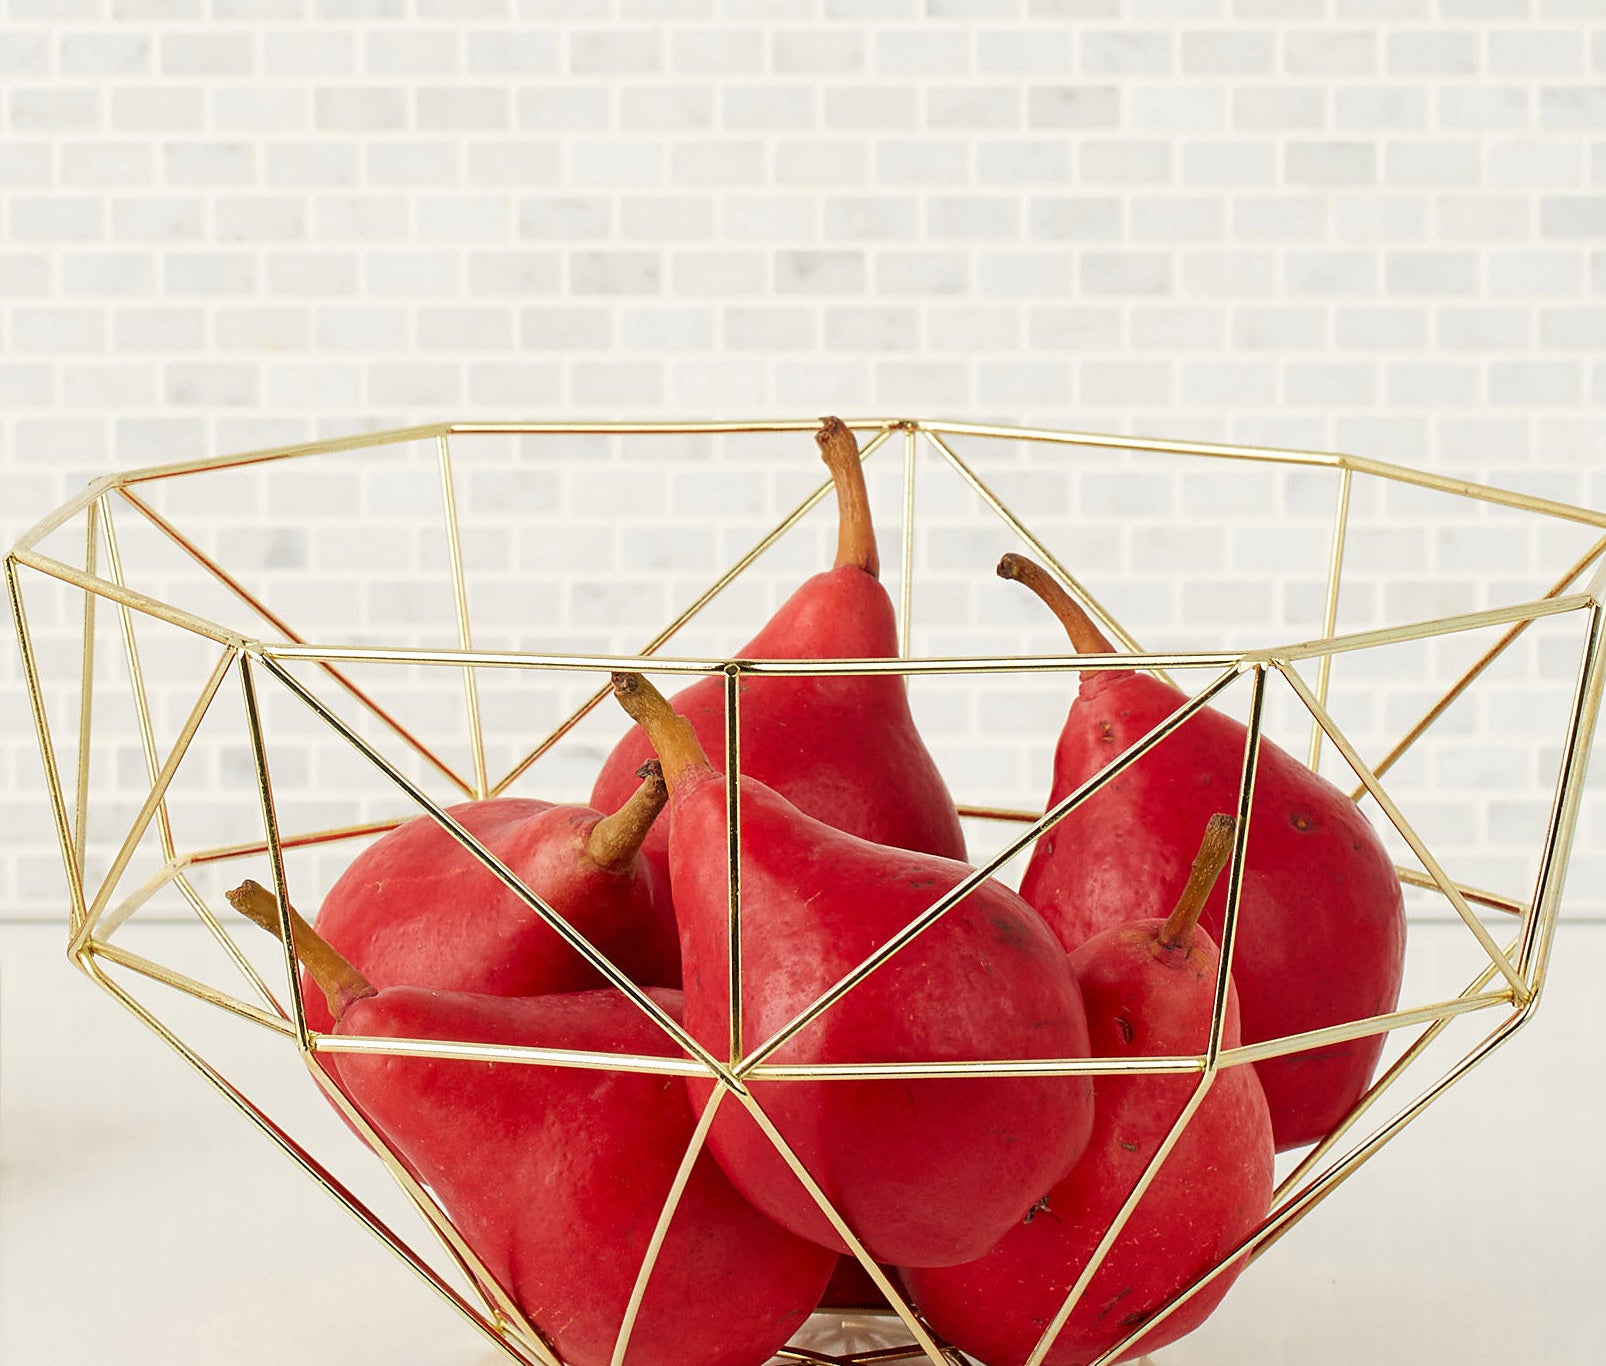 A metal bowl with pears inside it